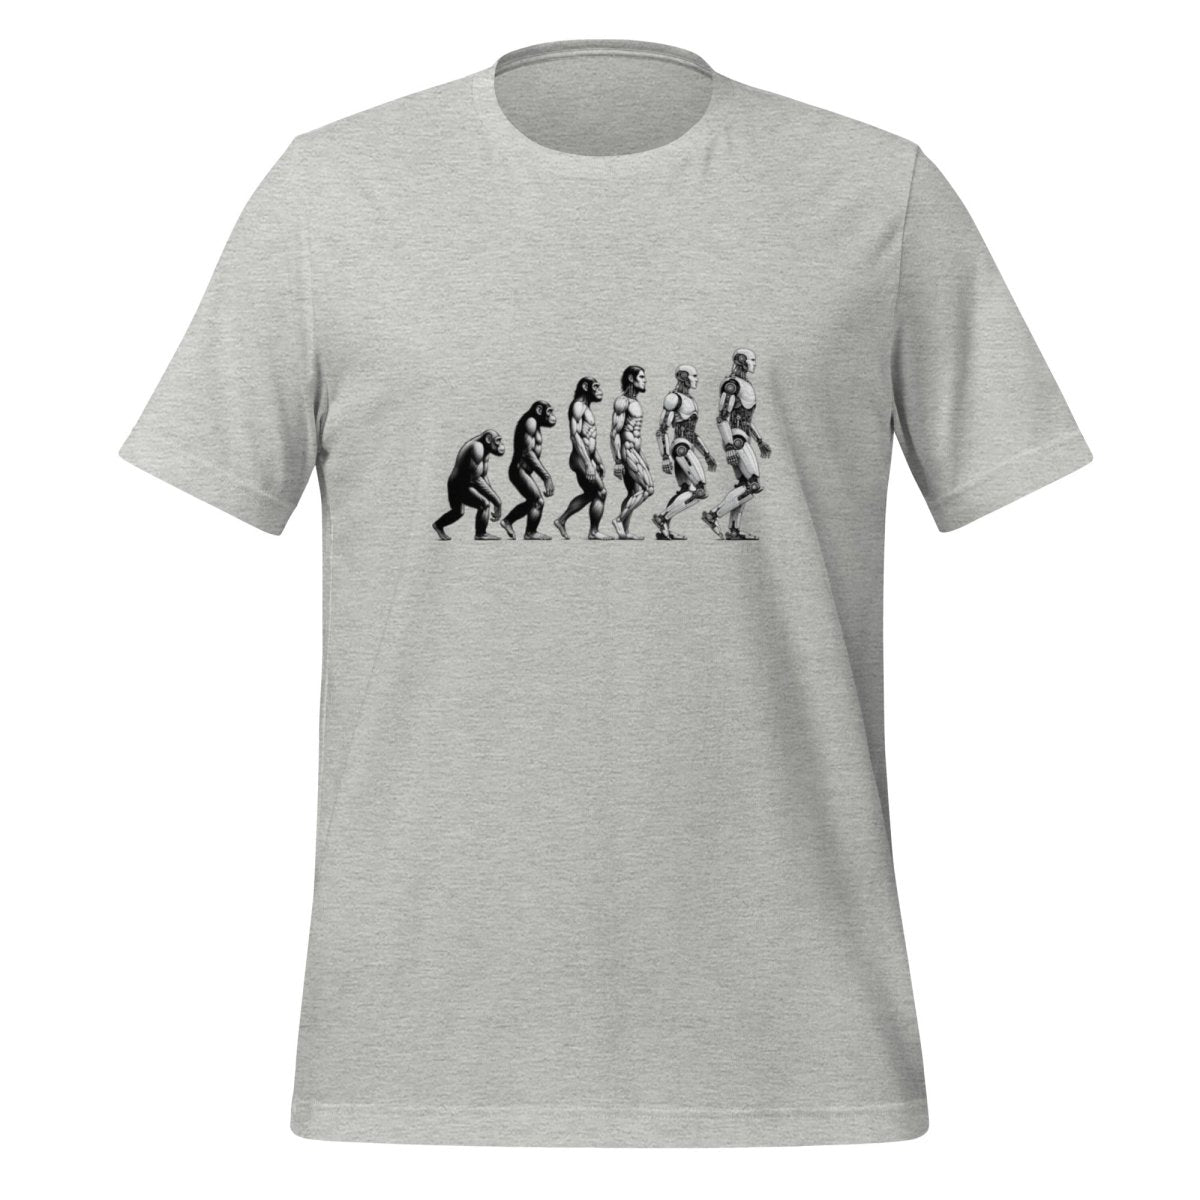 Human Evolution to Robot T - Shirt (unisex) - Athletic Heather - AI Store